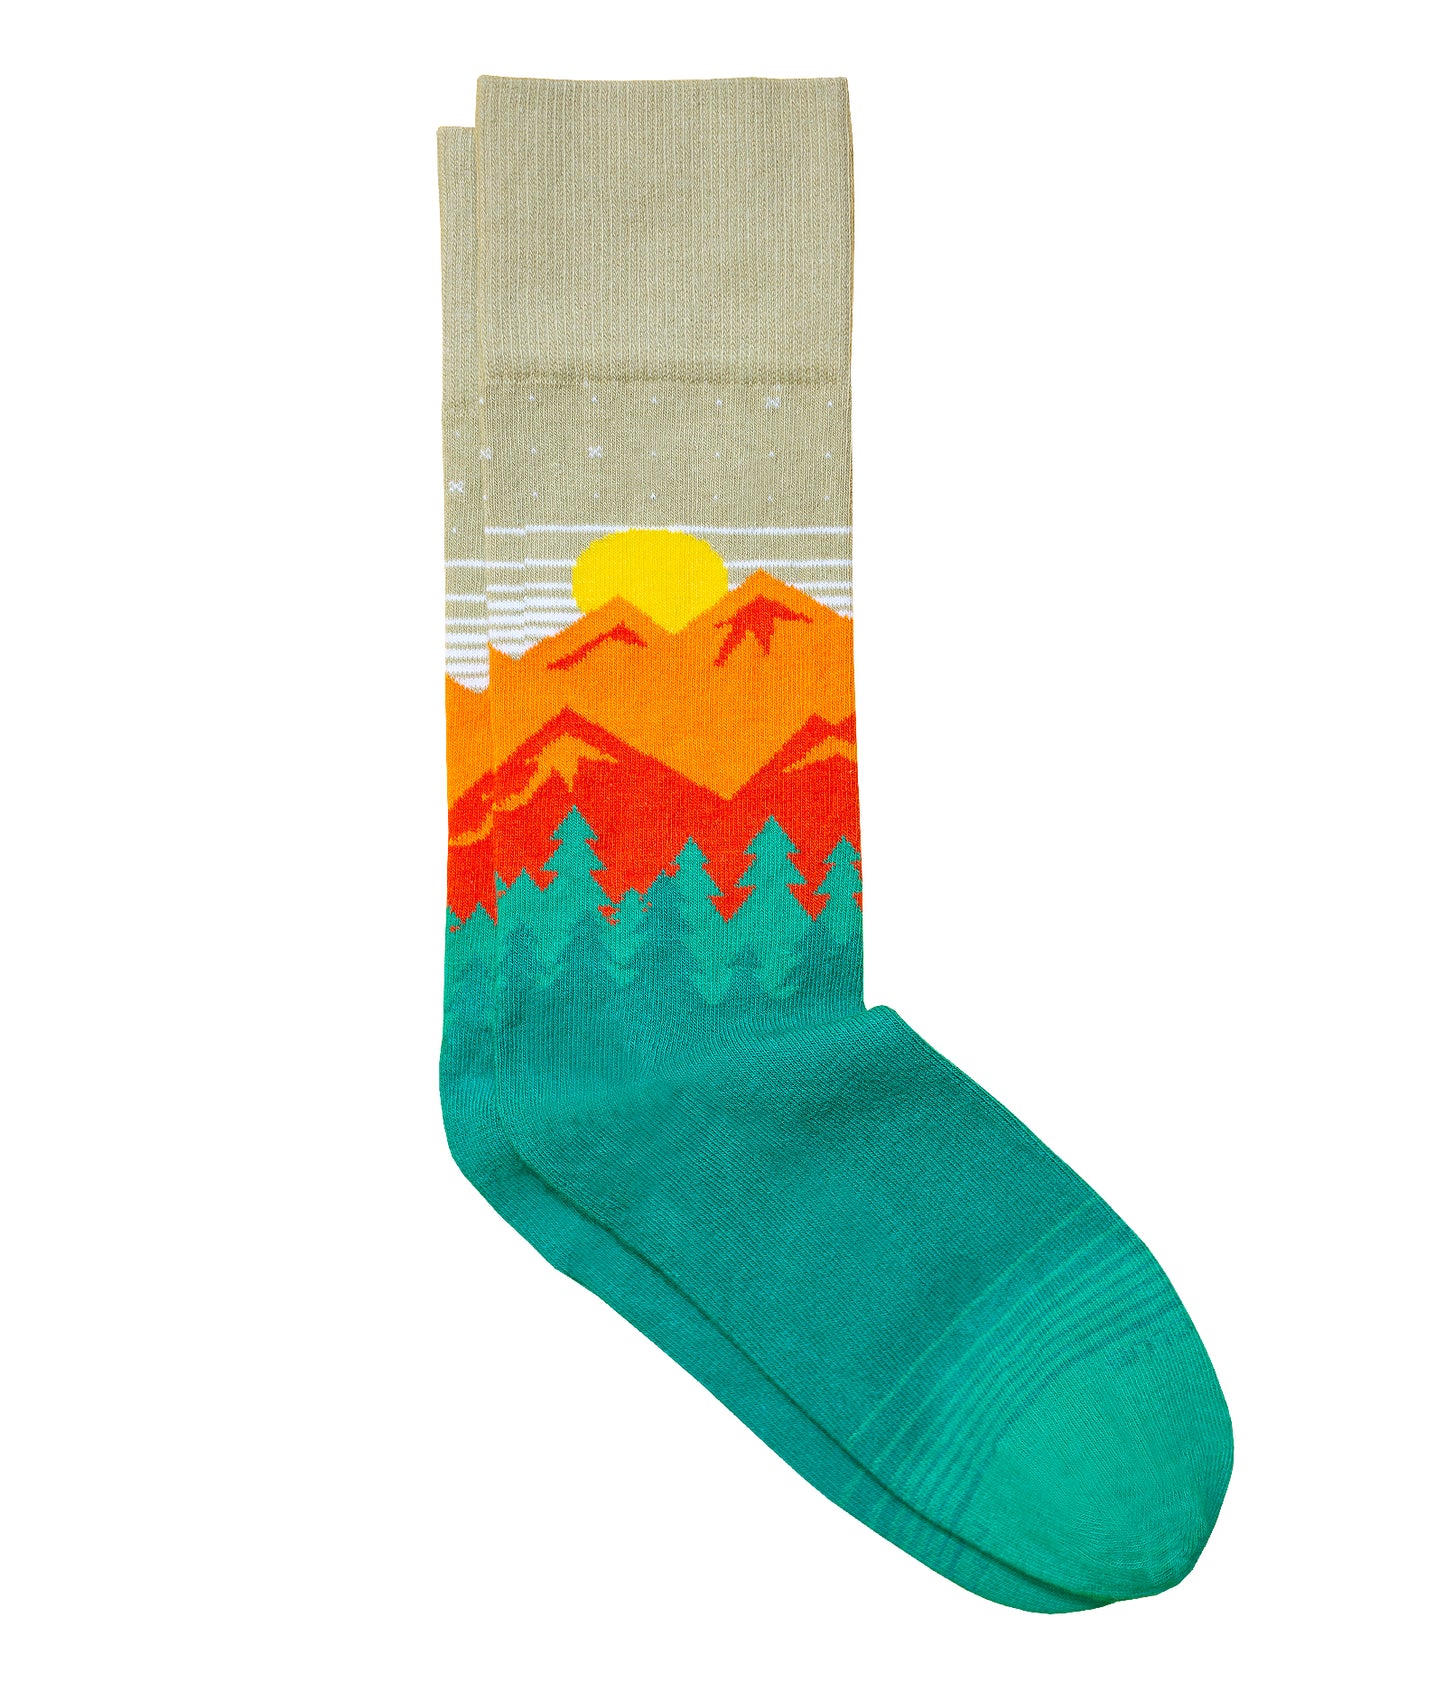 The Yellowstone sock in the Sand color variation. The sock features a mountain and forest vista.